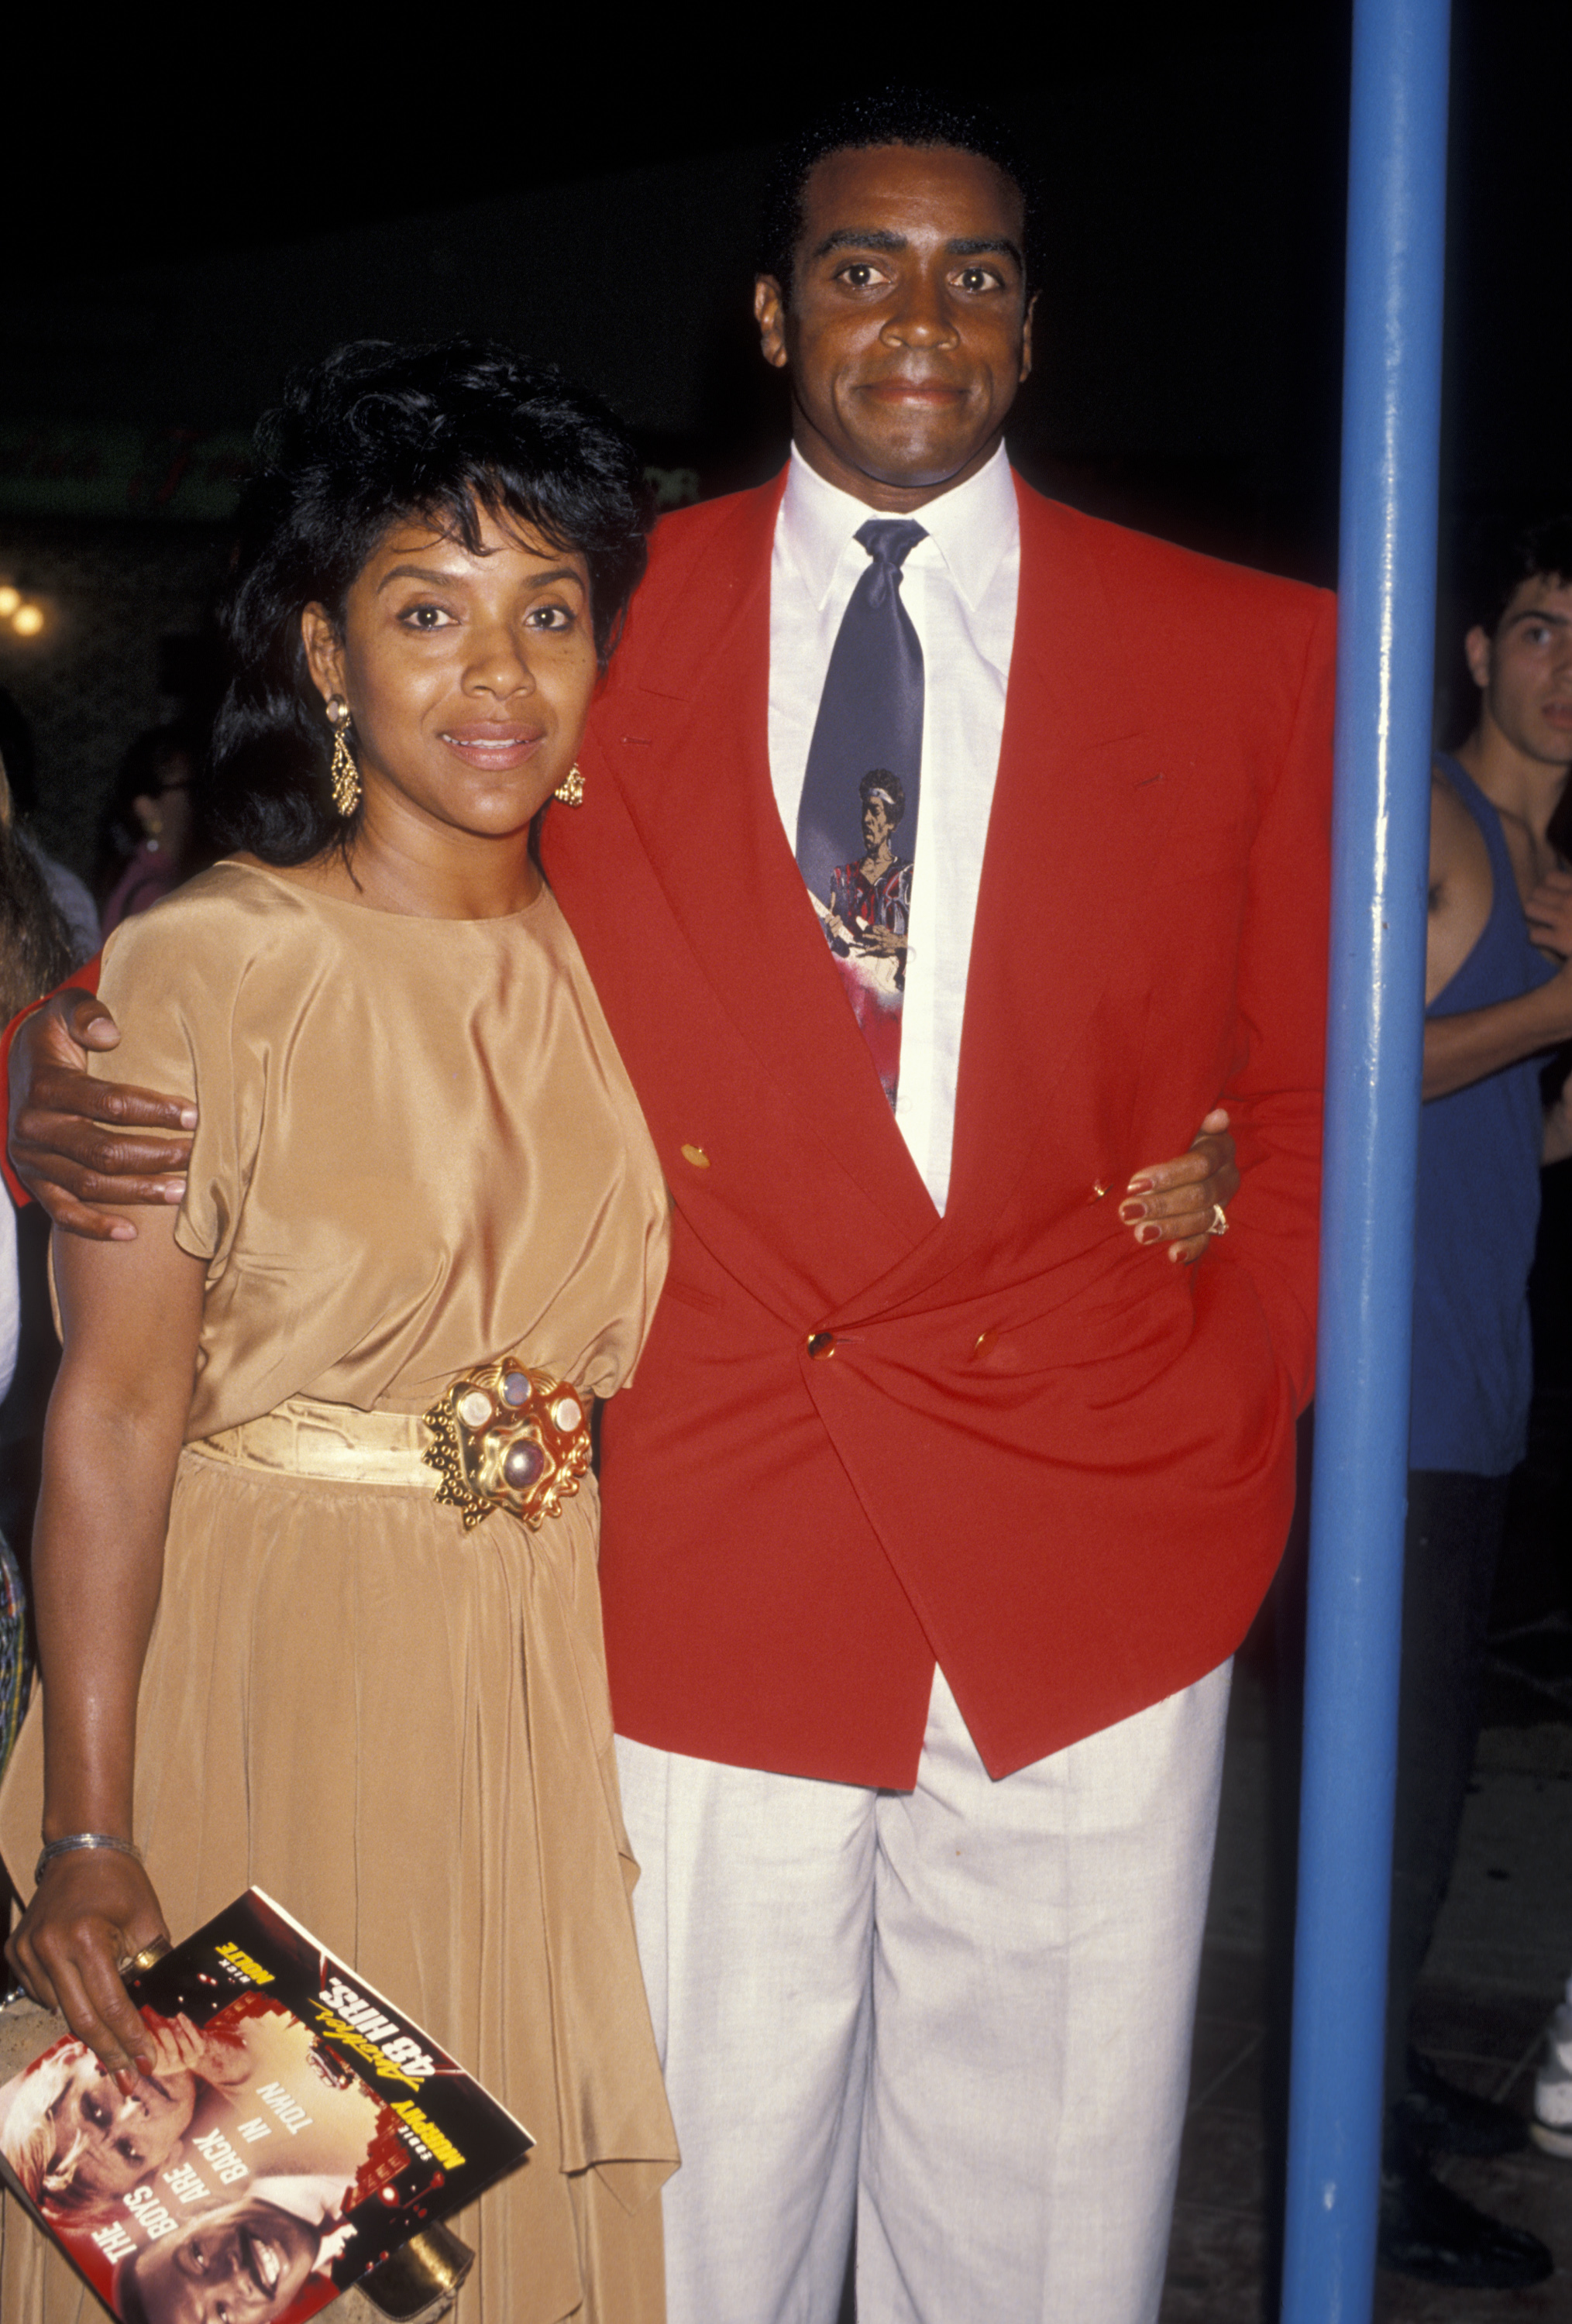 Phylicia Rashad and Ahmad Rashad attend the screening of "Another 48 Hours" at Mann Village Theater on June 7, 1990, in Westwood, California. | Source: Getty Images